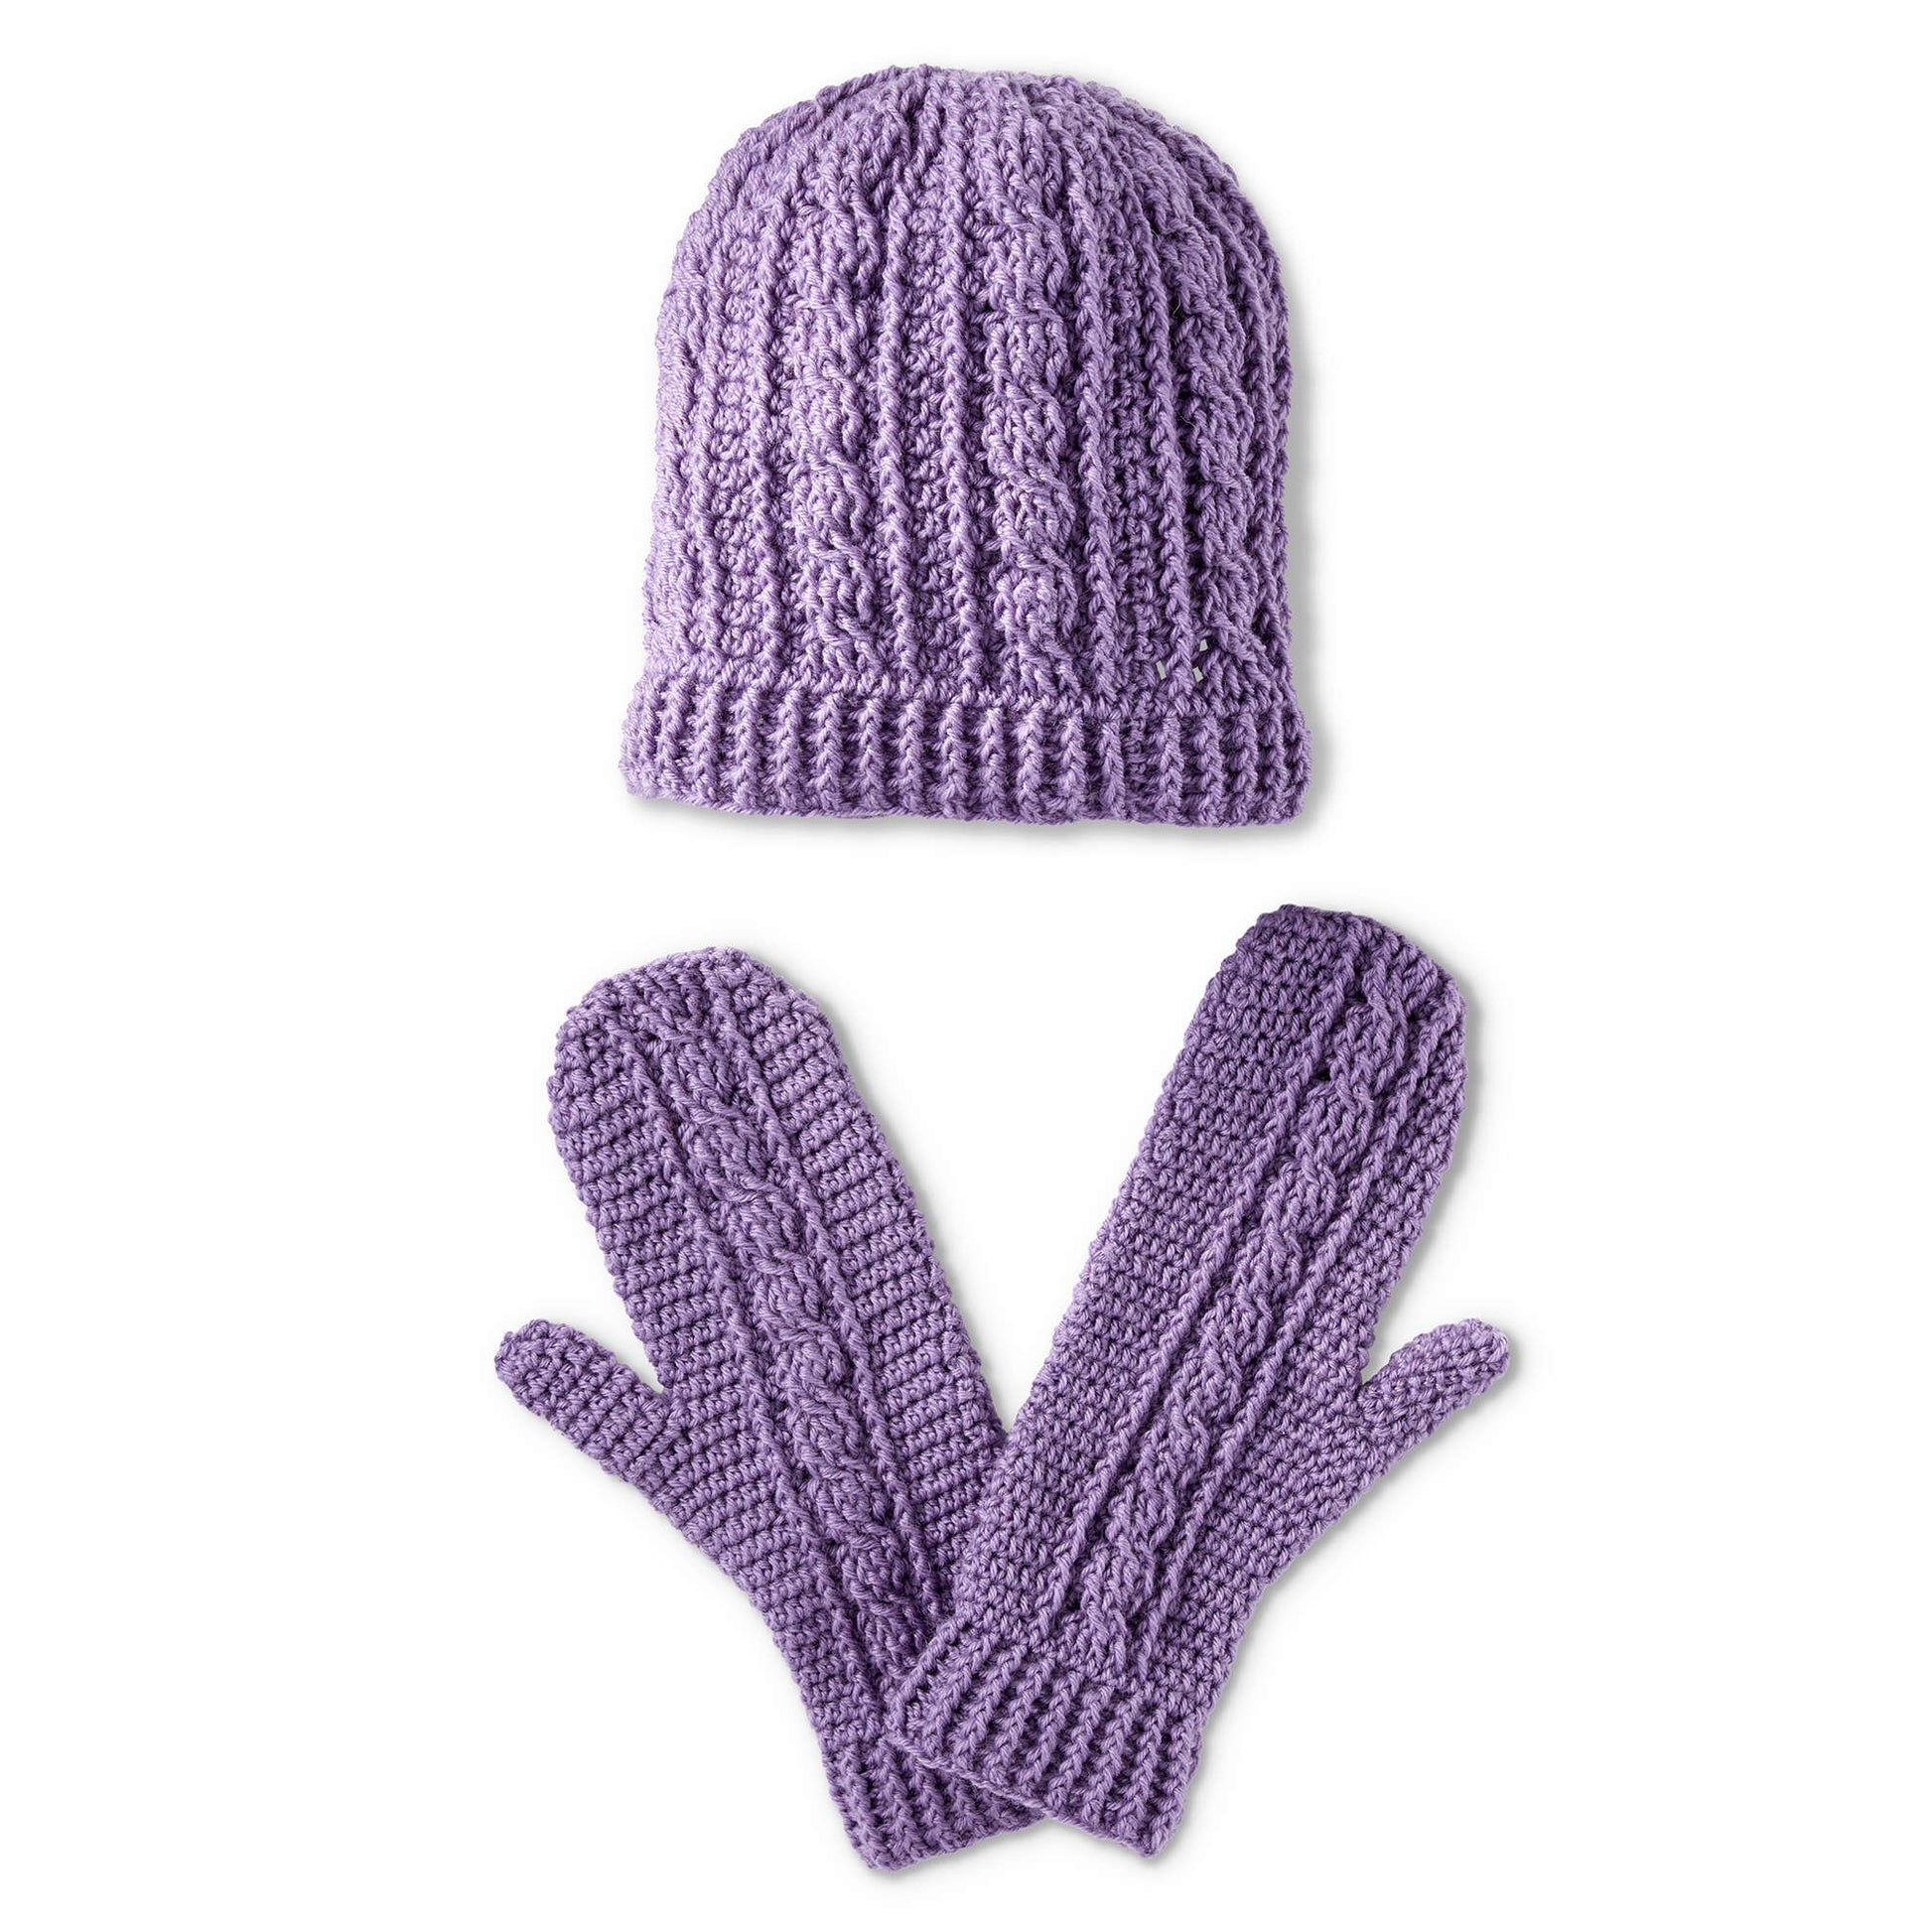 Free Patons Crochet Cables Hat And Mittens Set Pattern